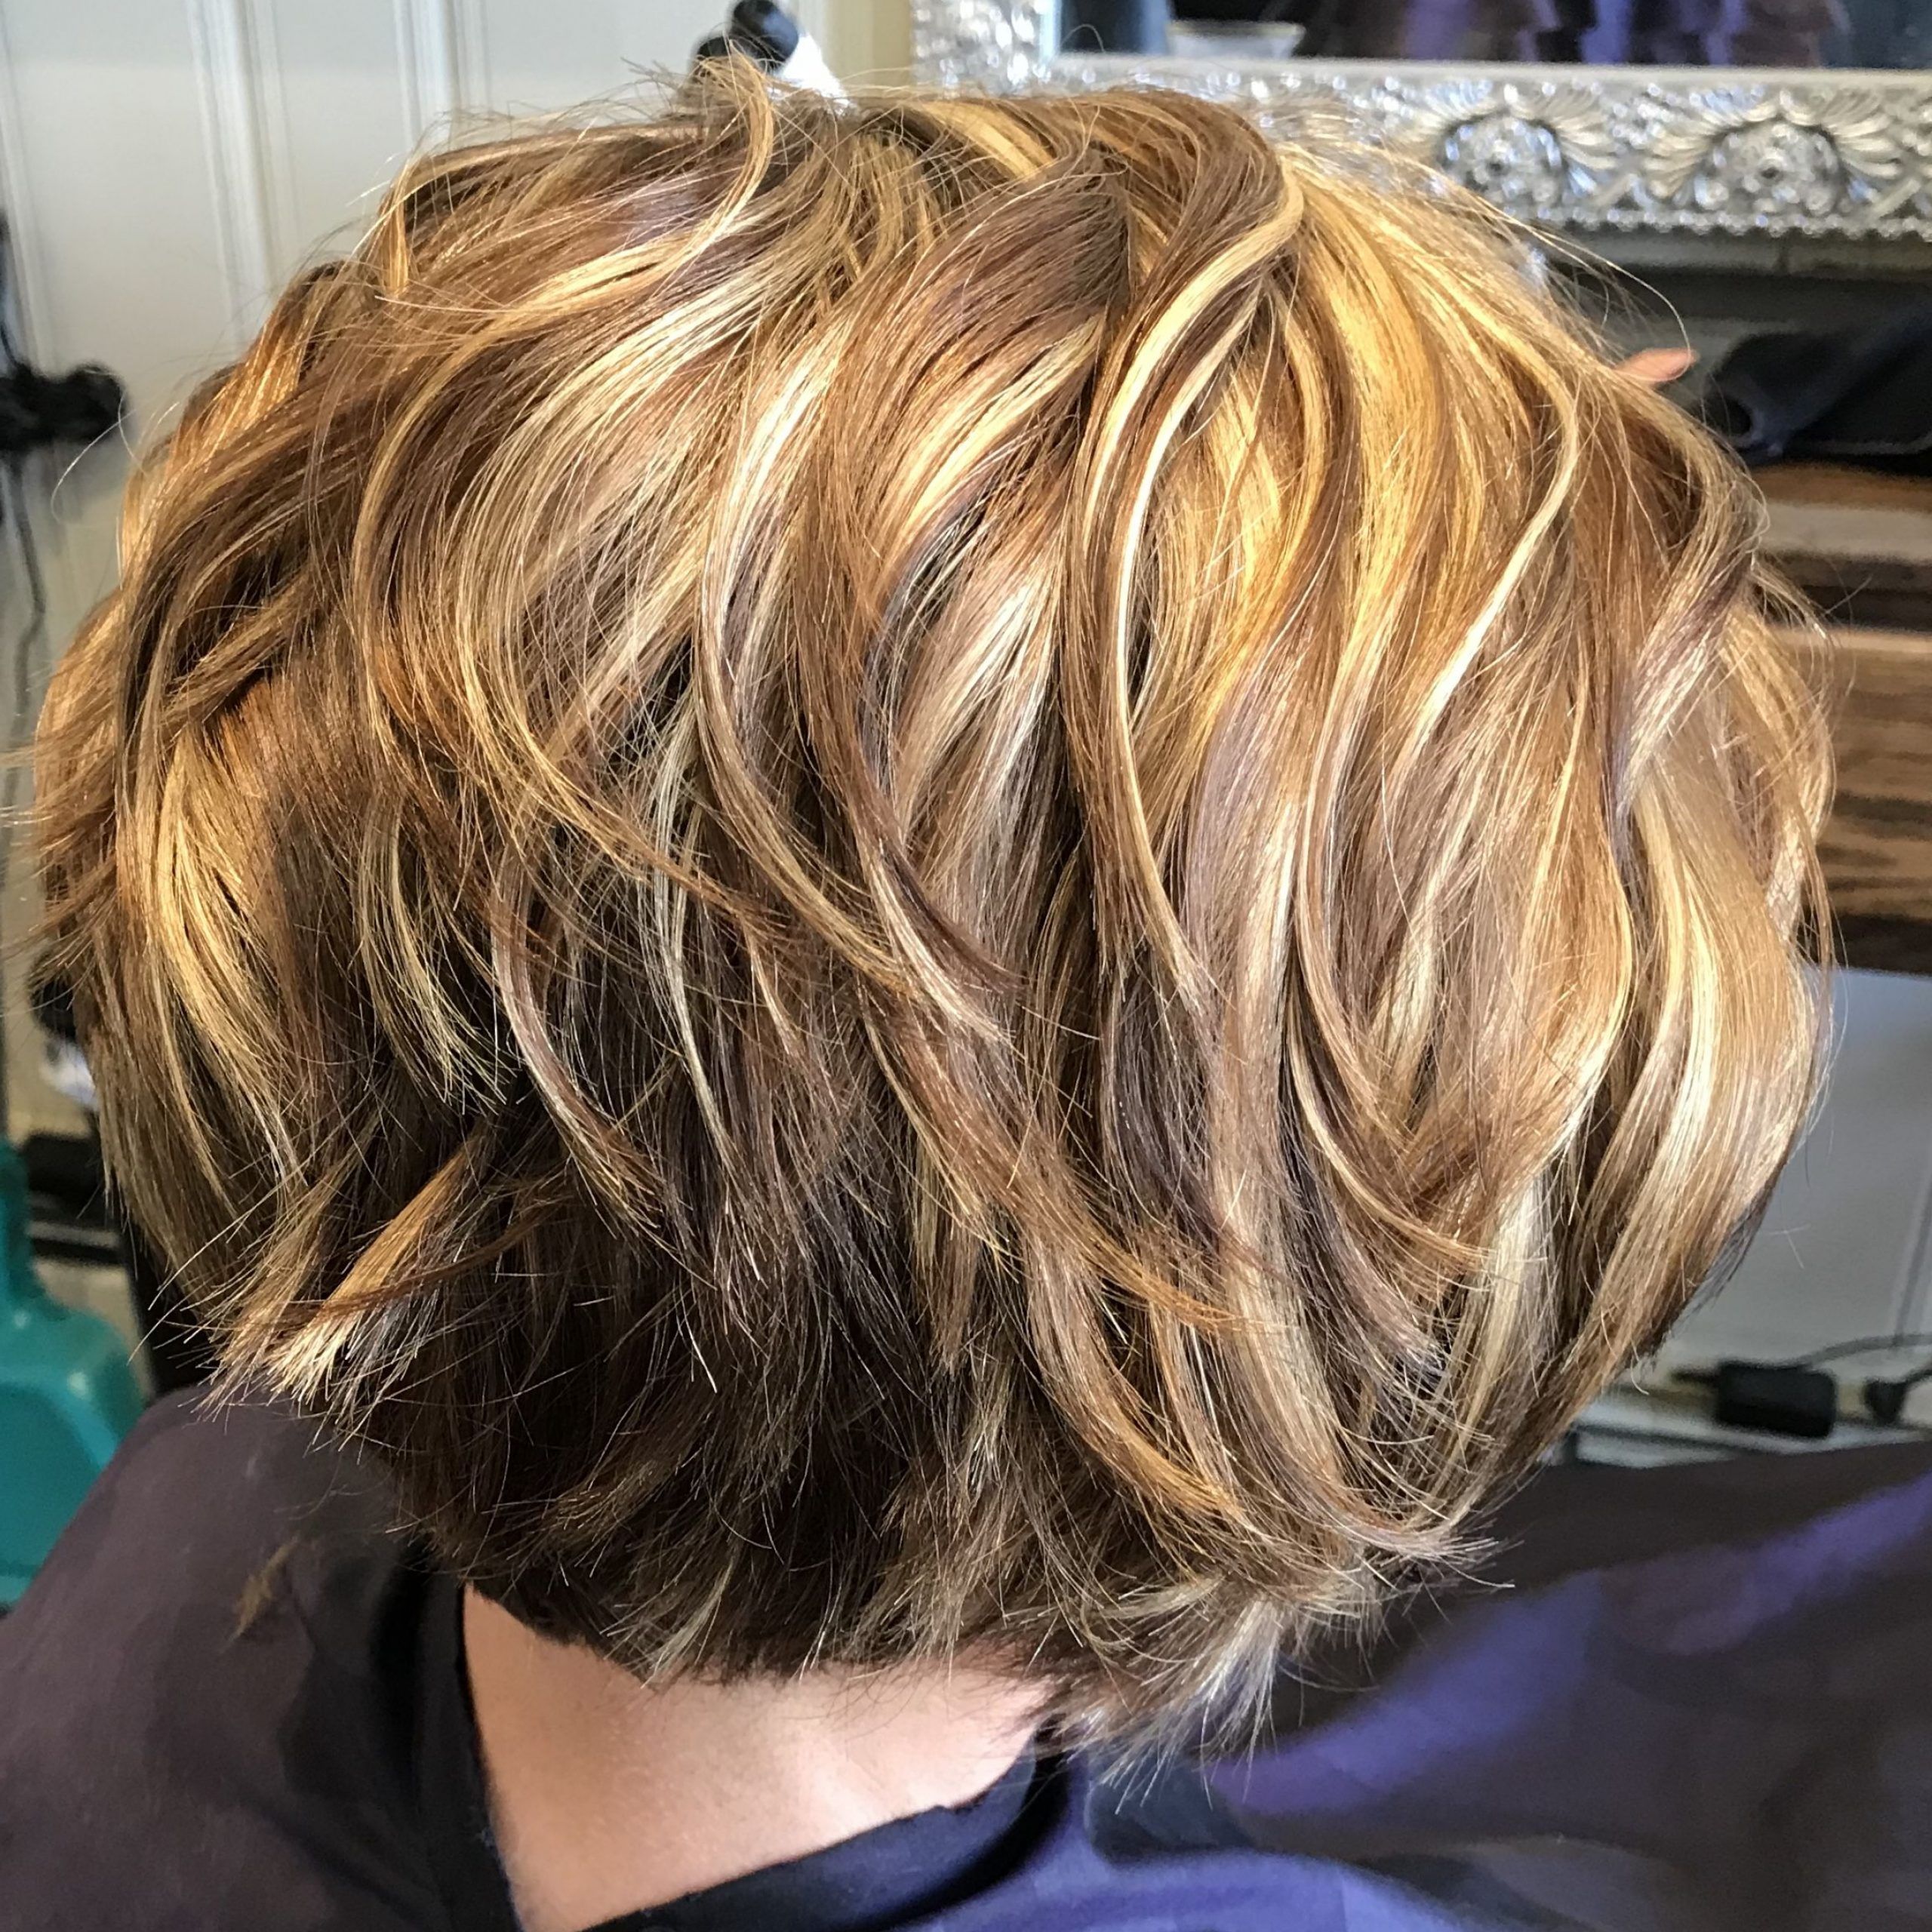 Blonde And Caramel Highlights On A Short, Choppy Bob Haircut For Choppy Bob Hairstyles With Blonde Ends (View 4 of 20)